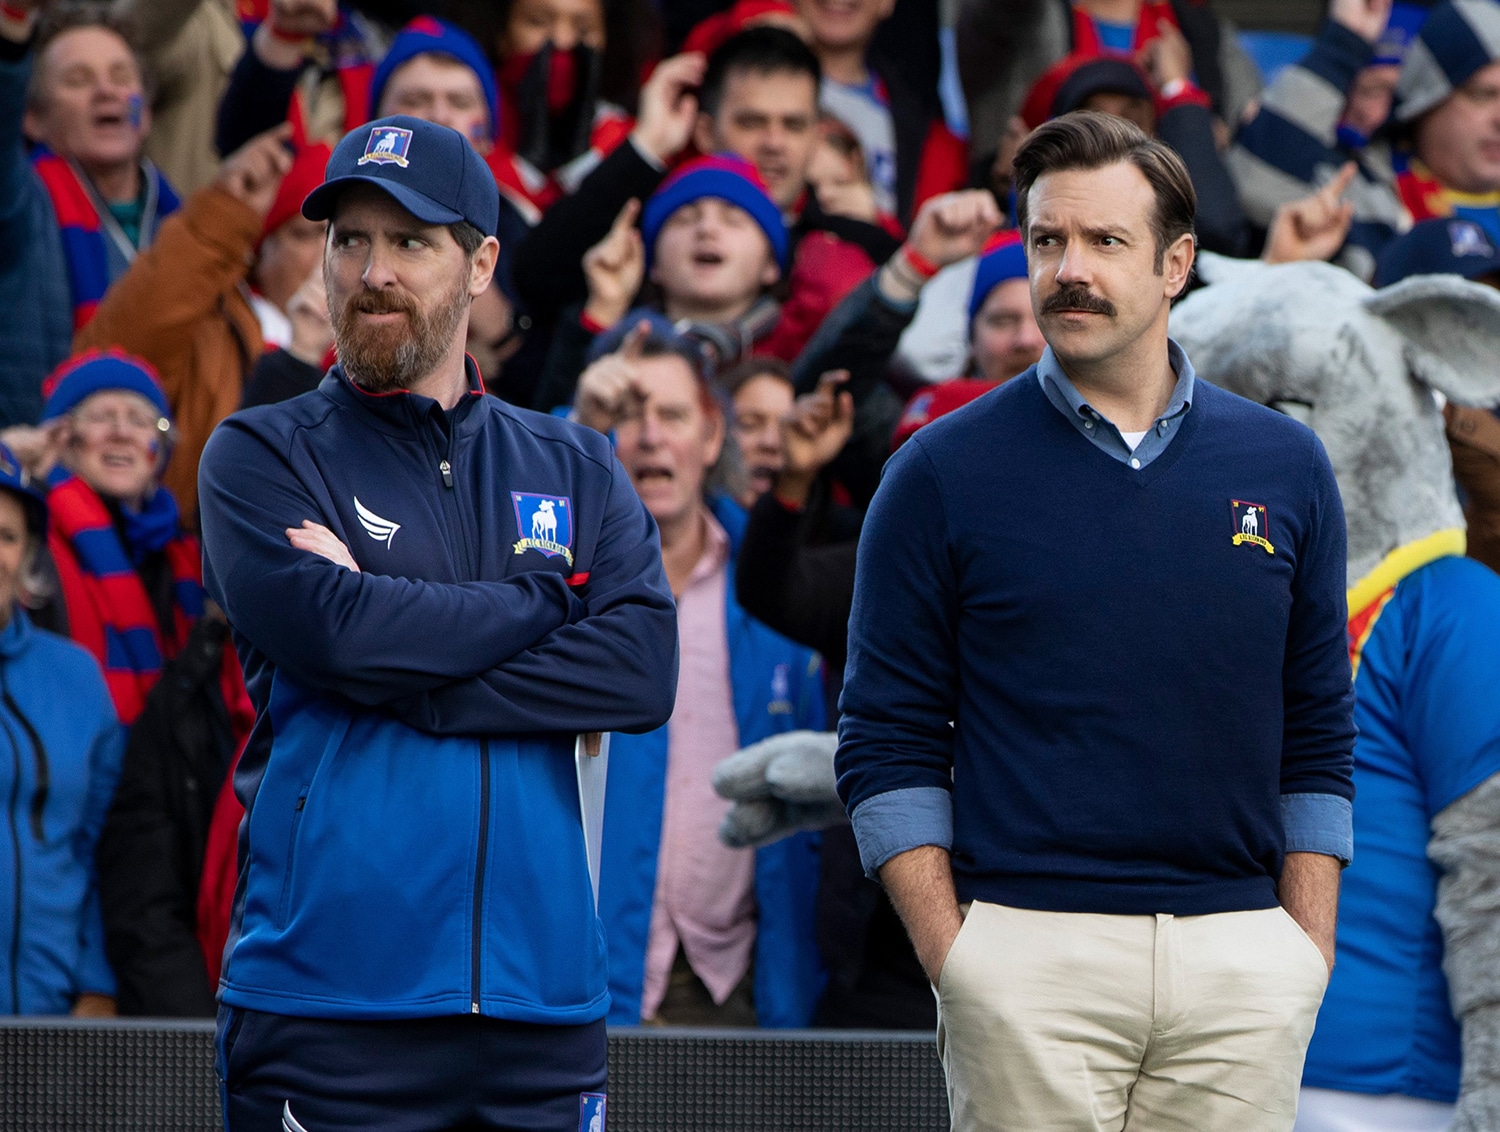 This is a scene from the TV show "Ted Lasso" with stars Brendan Hunt as Coach Beard on the left and Jason Sudeikis as Coach Ted Lasso on the right.